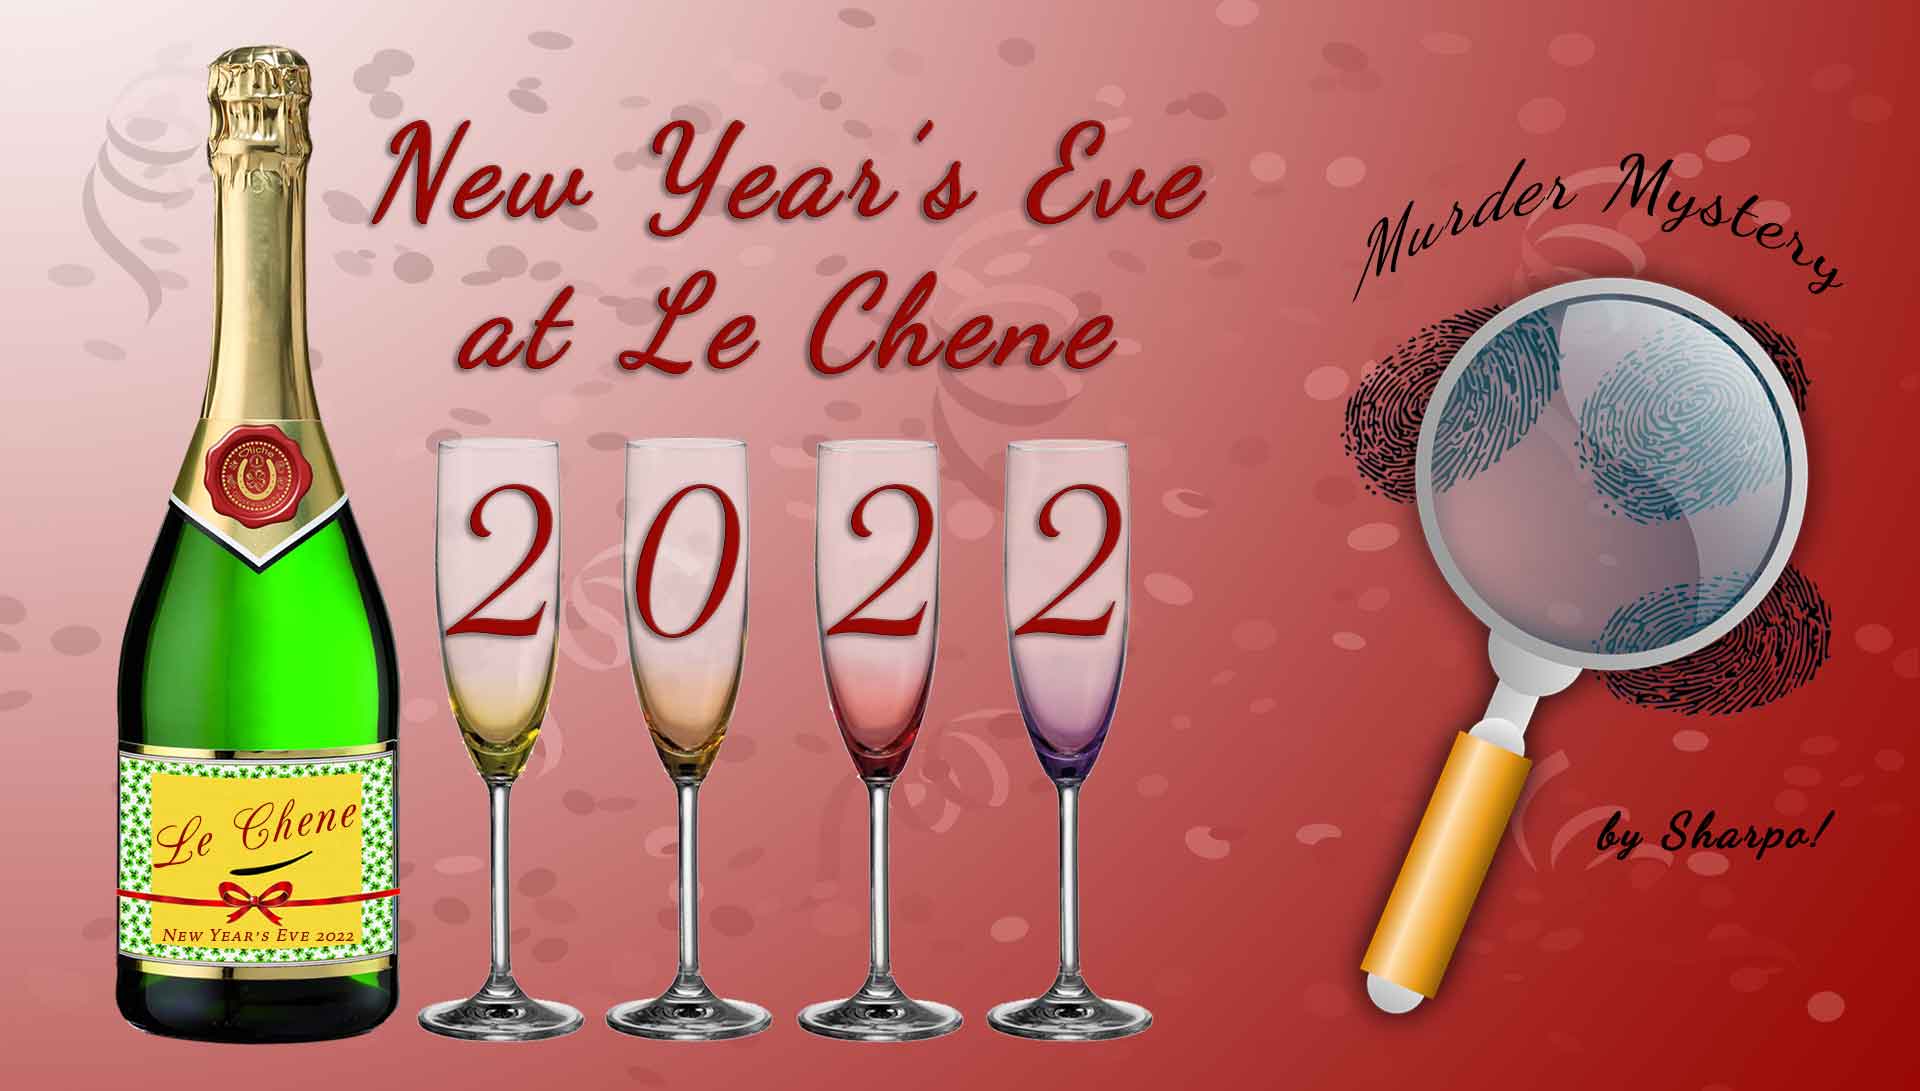 Le Chene New Year's Eve 2022 Murder Mystery Event Image